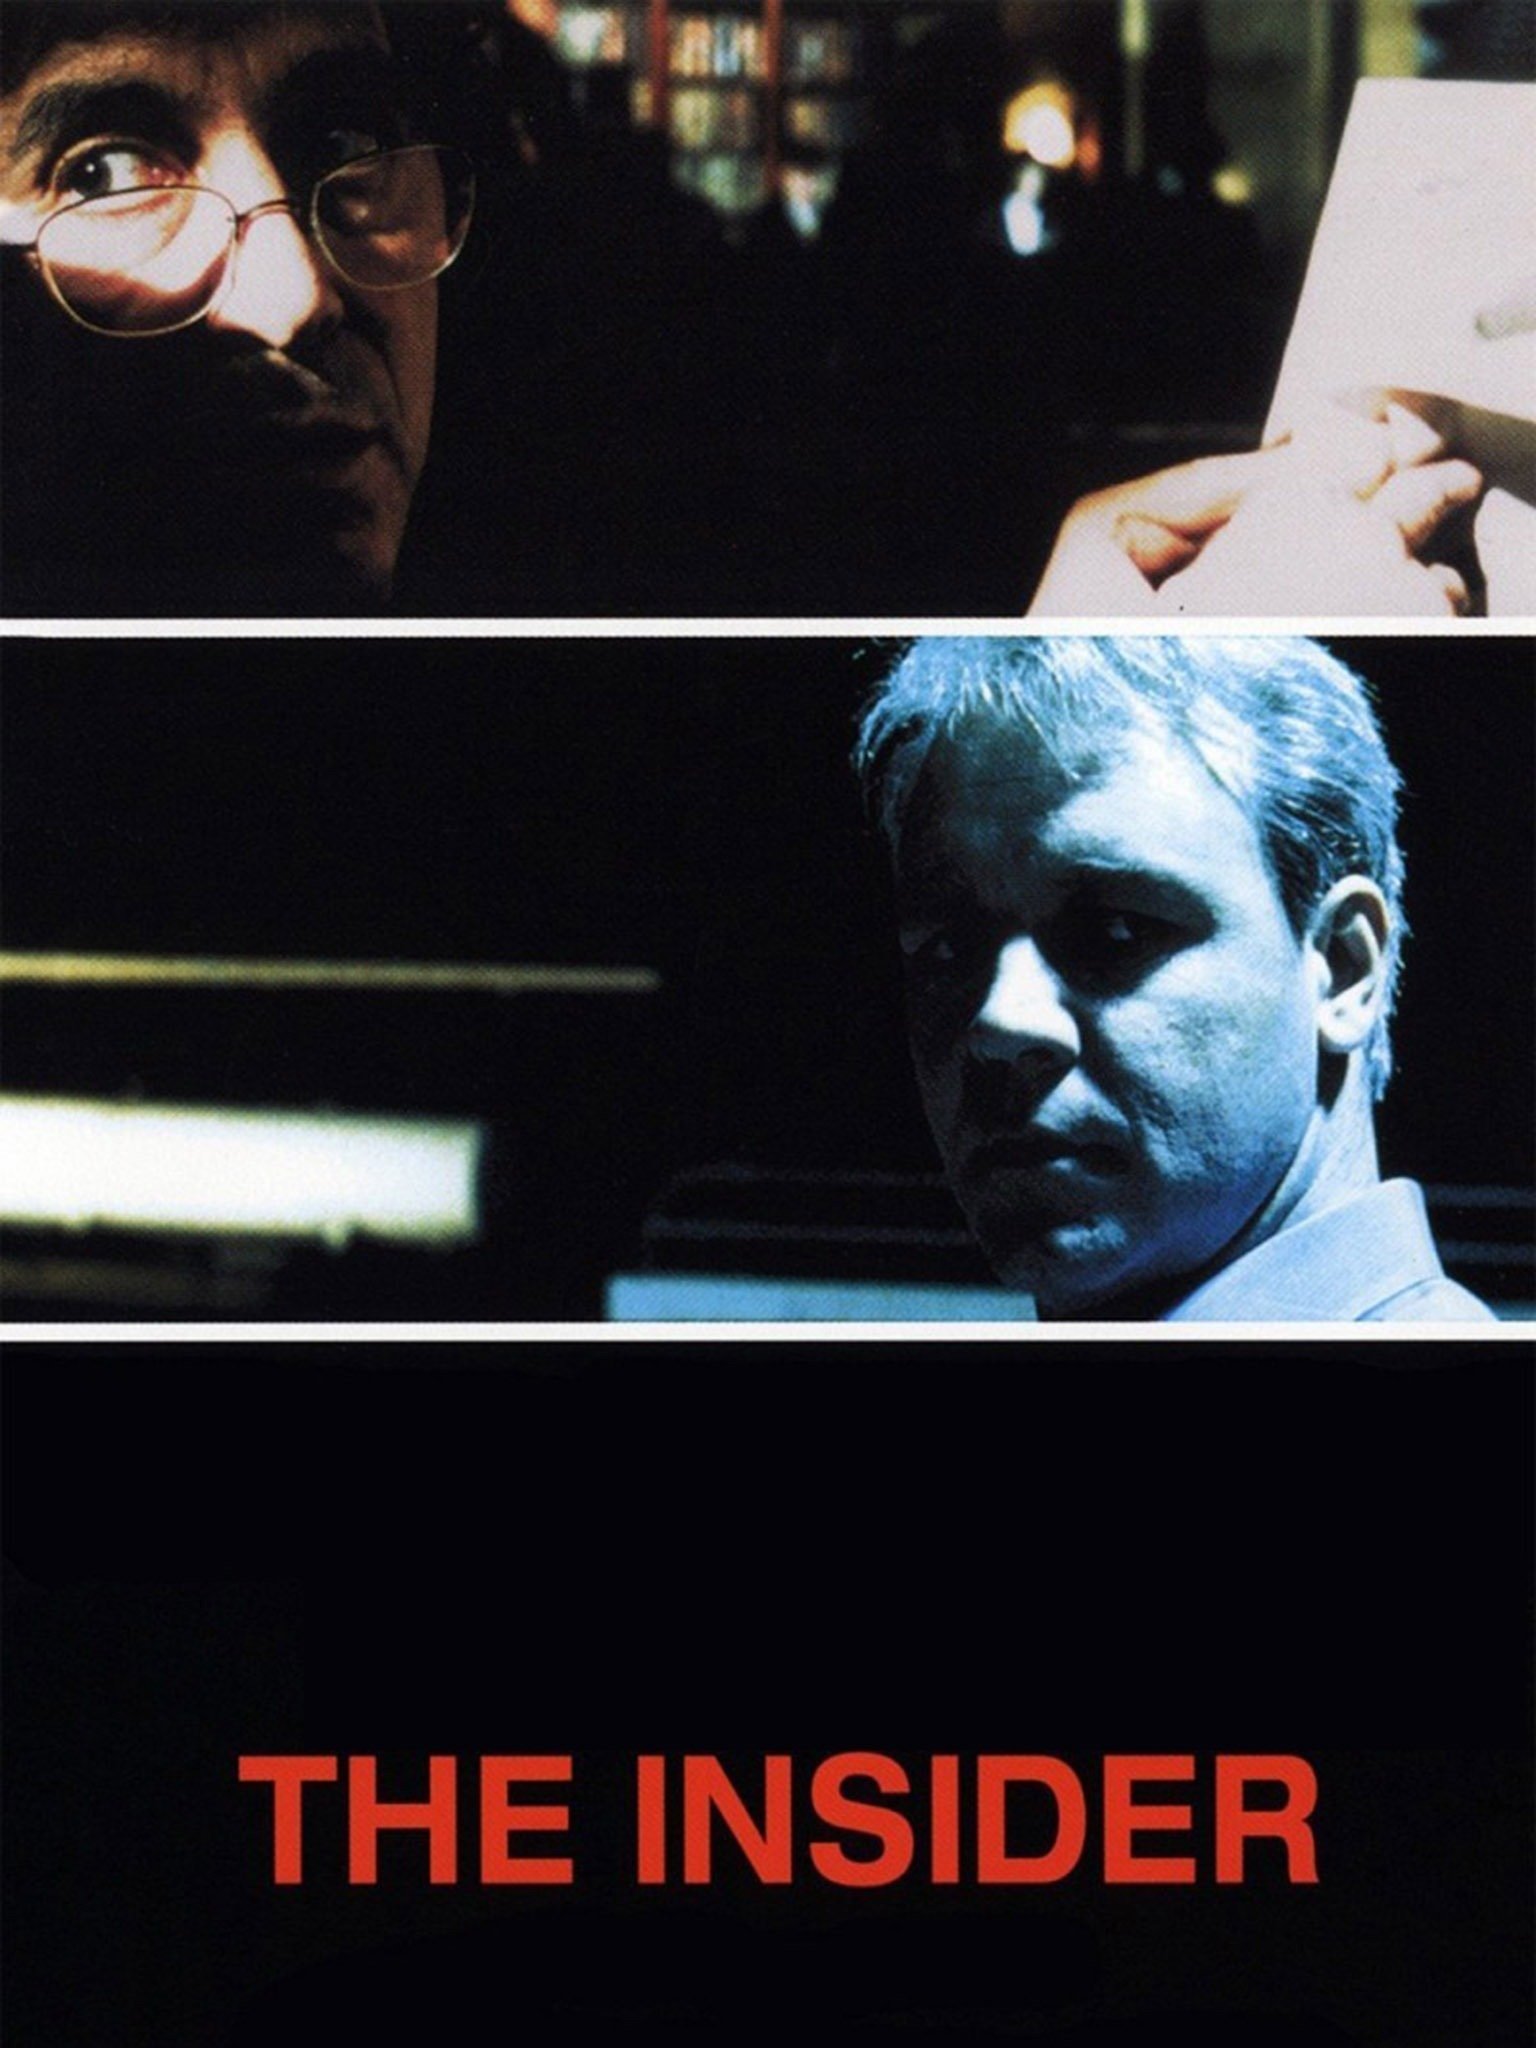 The Insider (1999) - Rotten Tomatoes